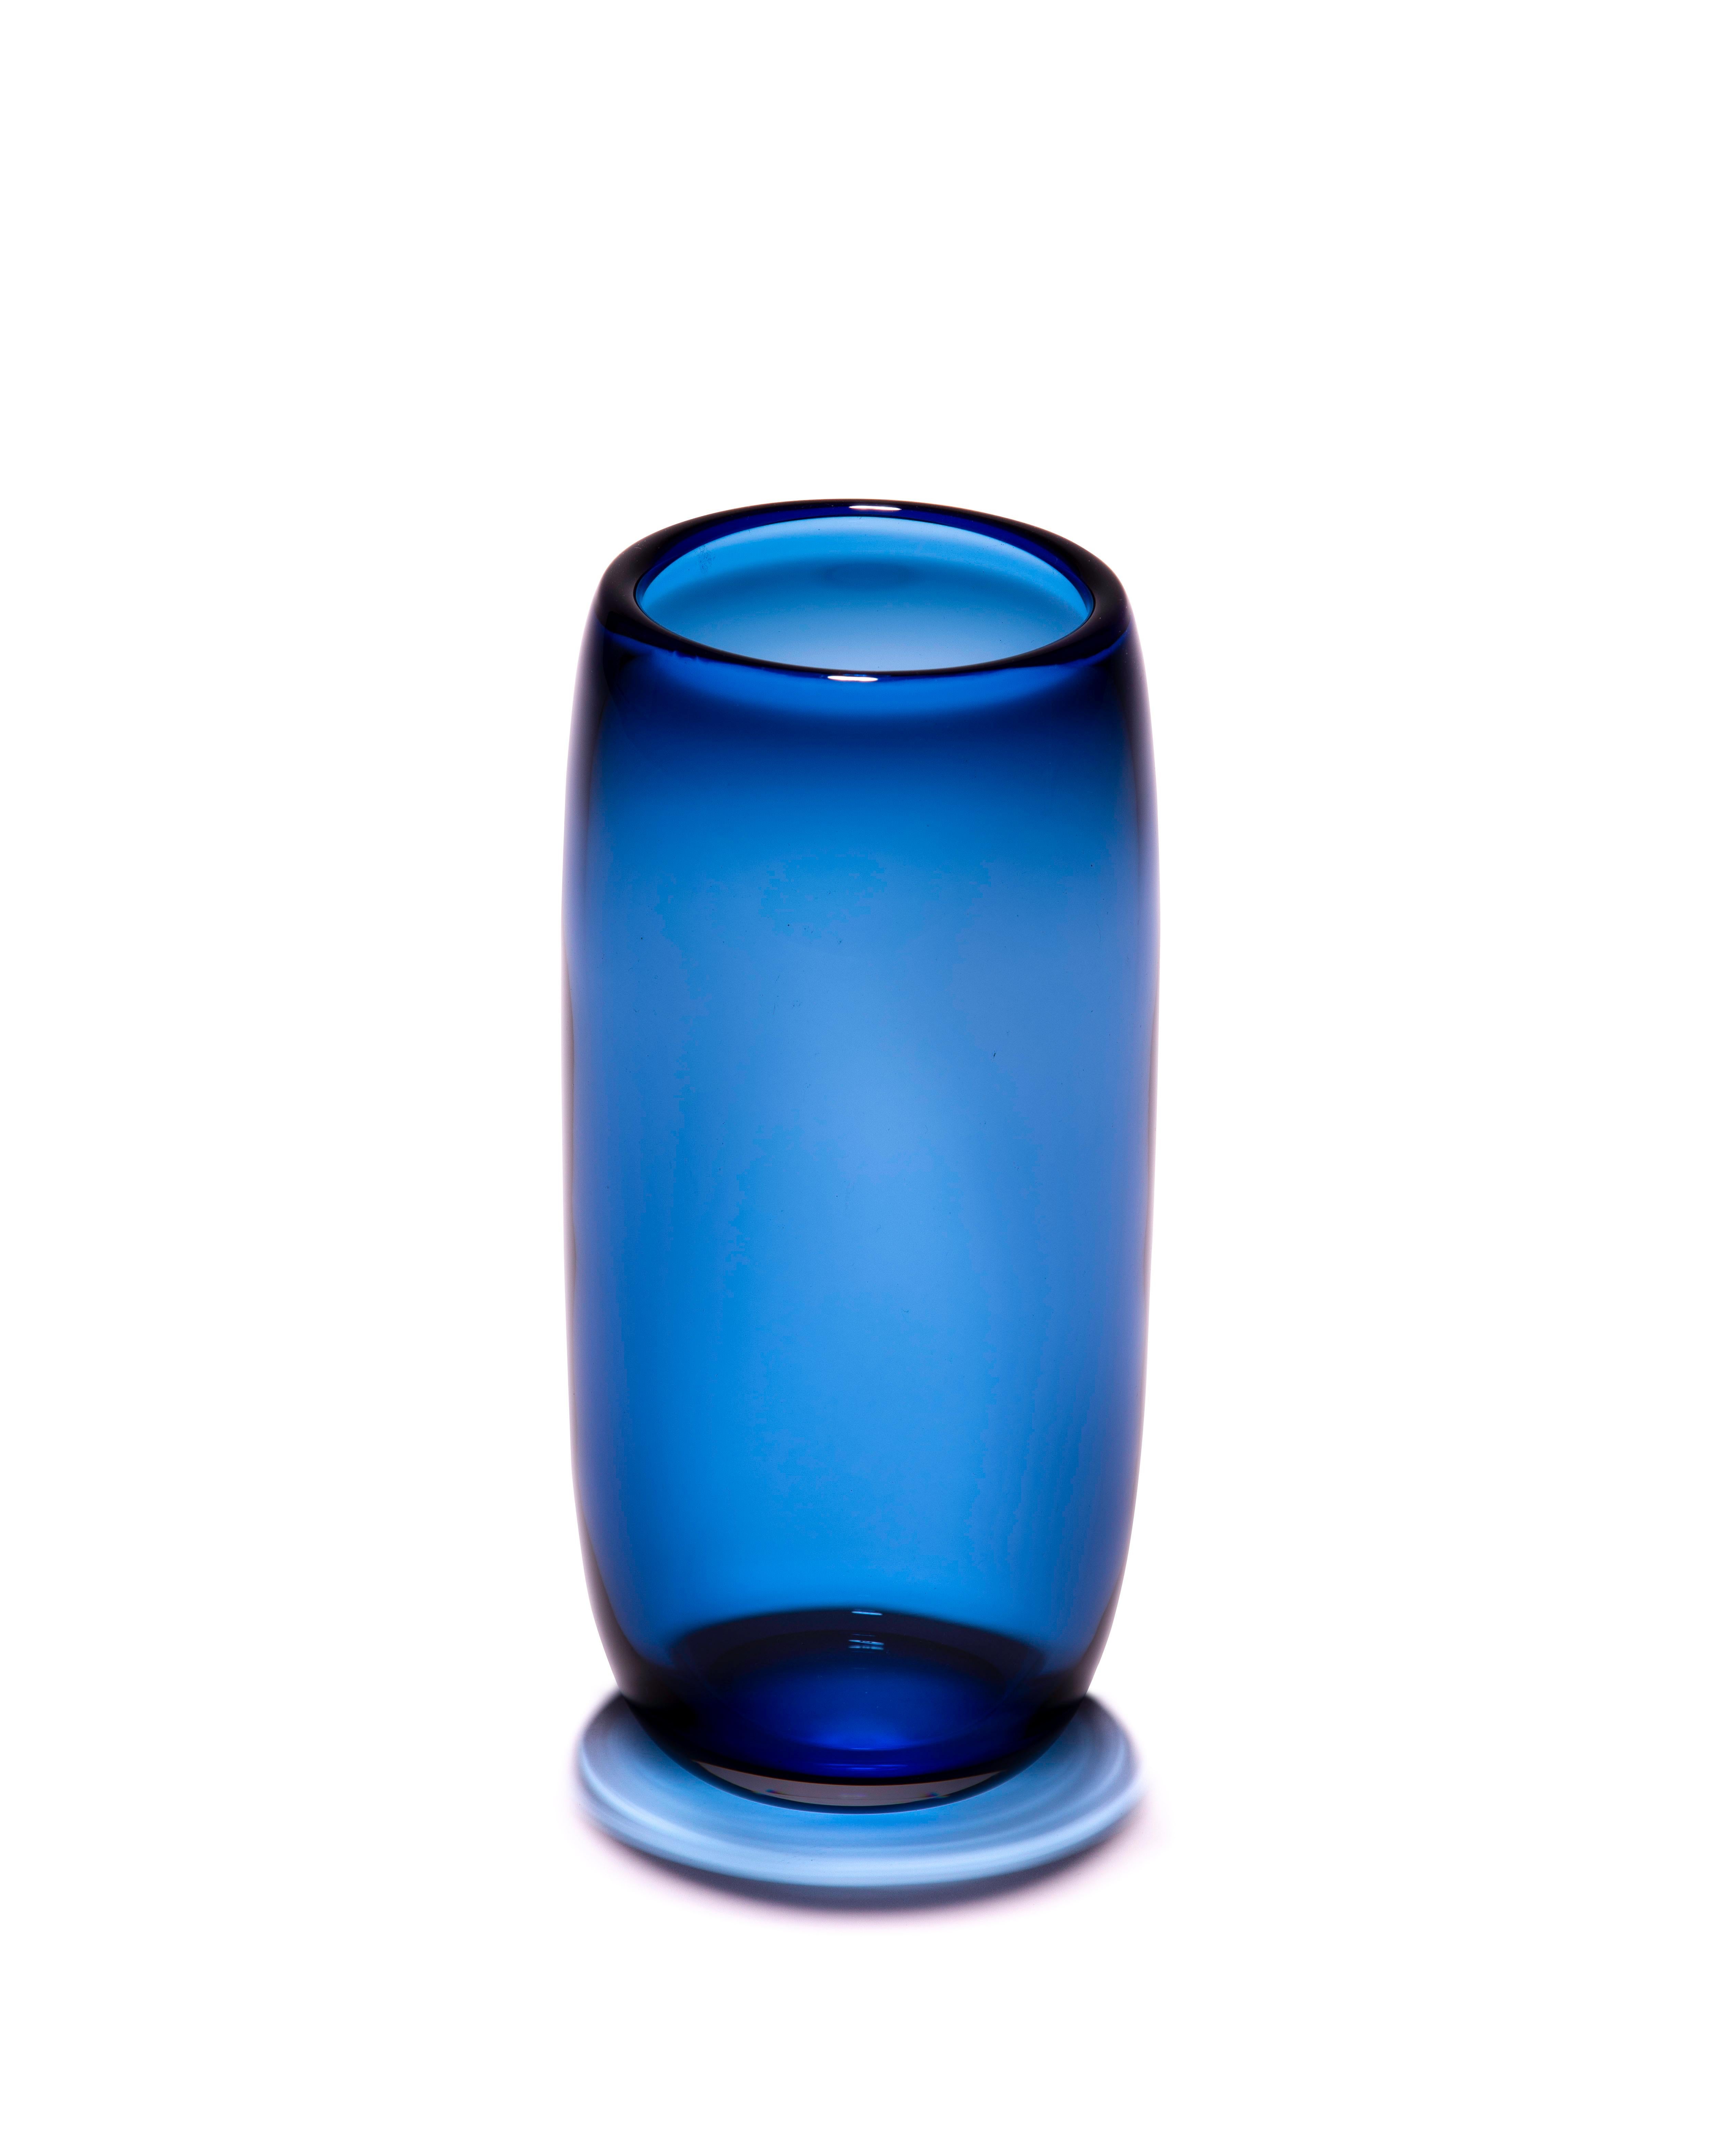 Unique Harvest Graal Blue and Black Glass Vase by Tiina Sarapu For Sale 6